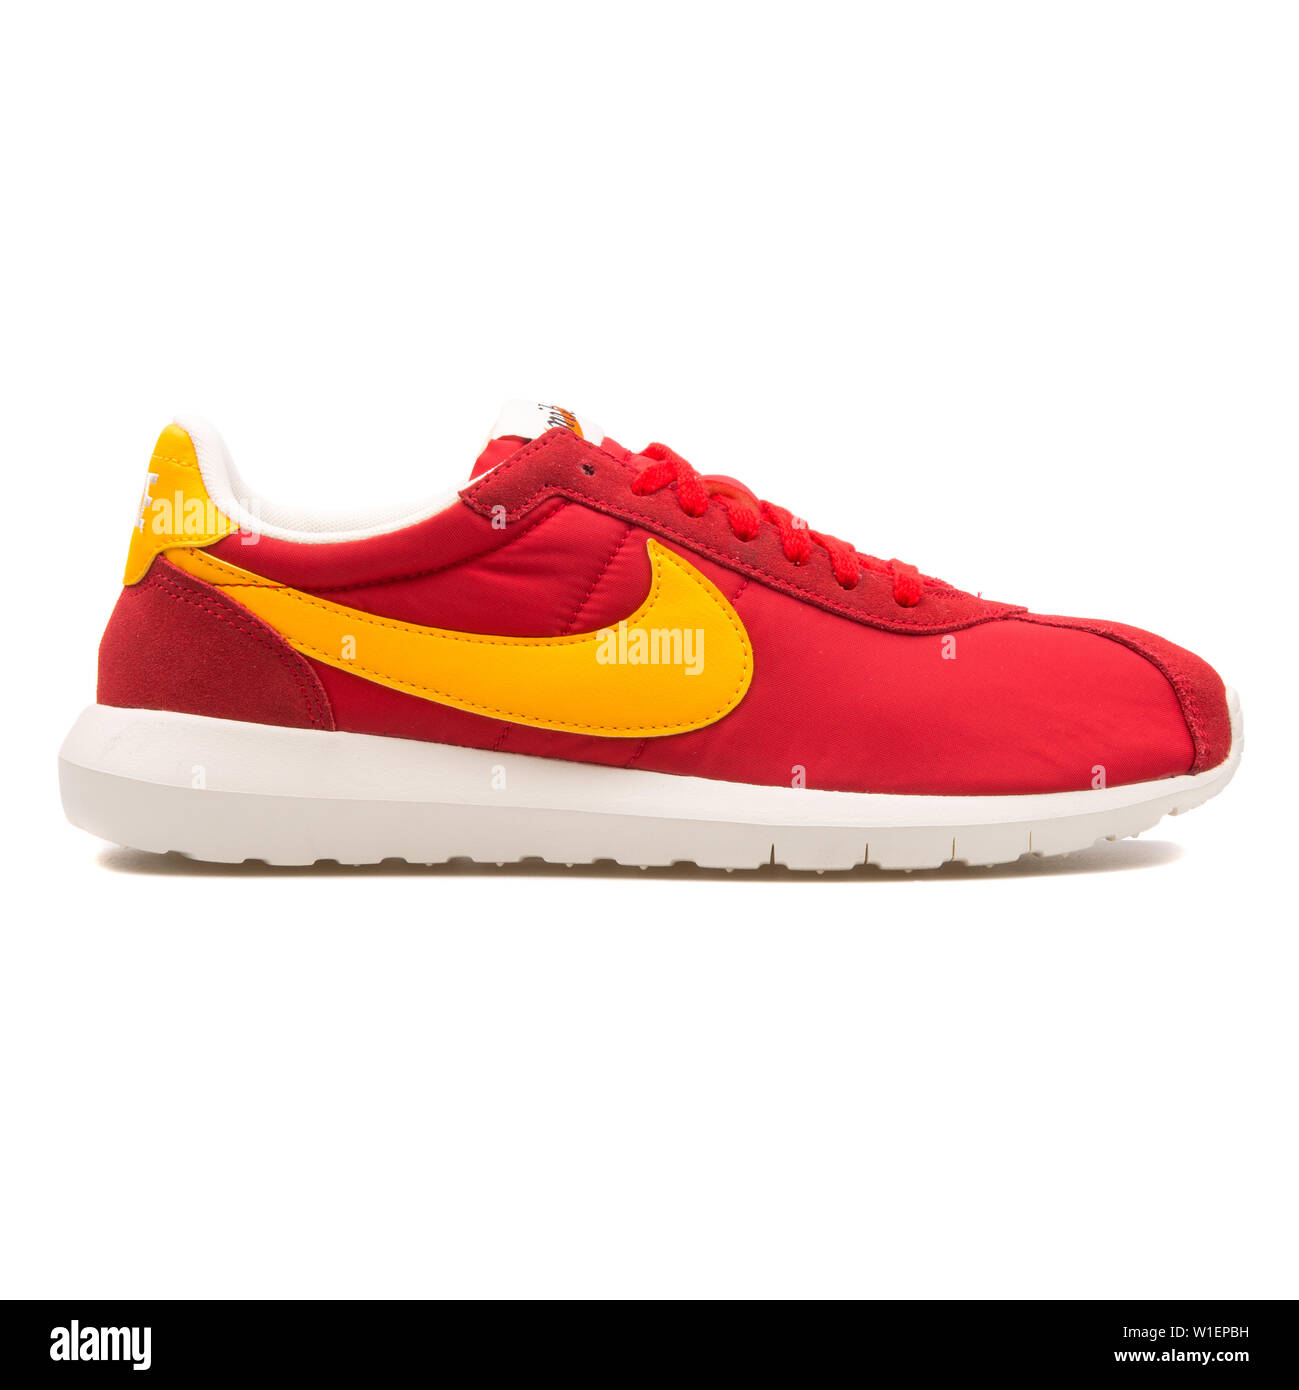 VIENNA, AUSTRIA - AUGUST 10, 2017: Nike Roshe LD 1000 red and yellow  sneaker on white background Stock Photo - Alamy